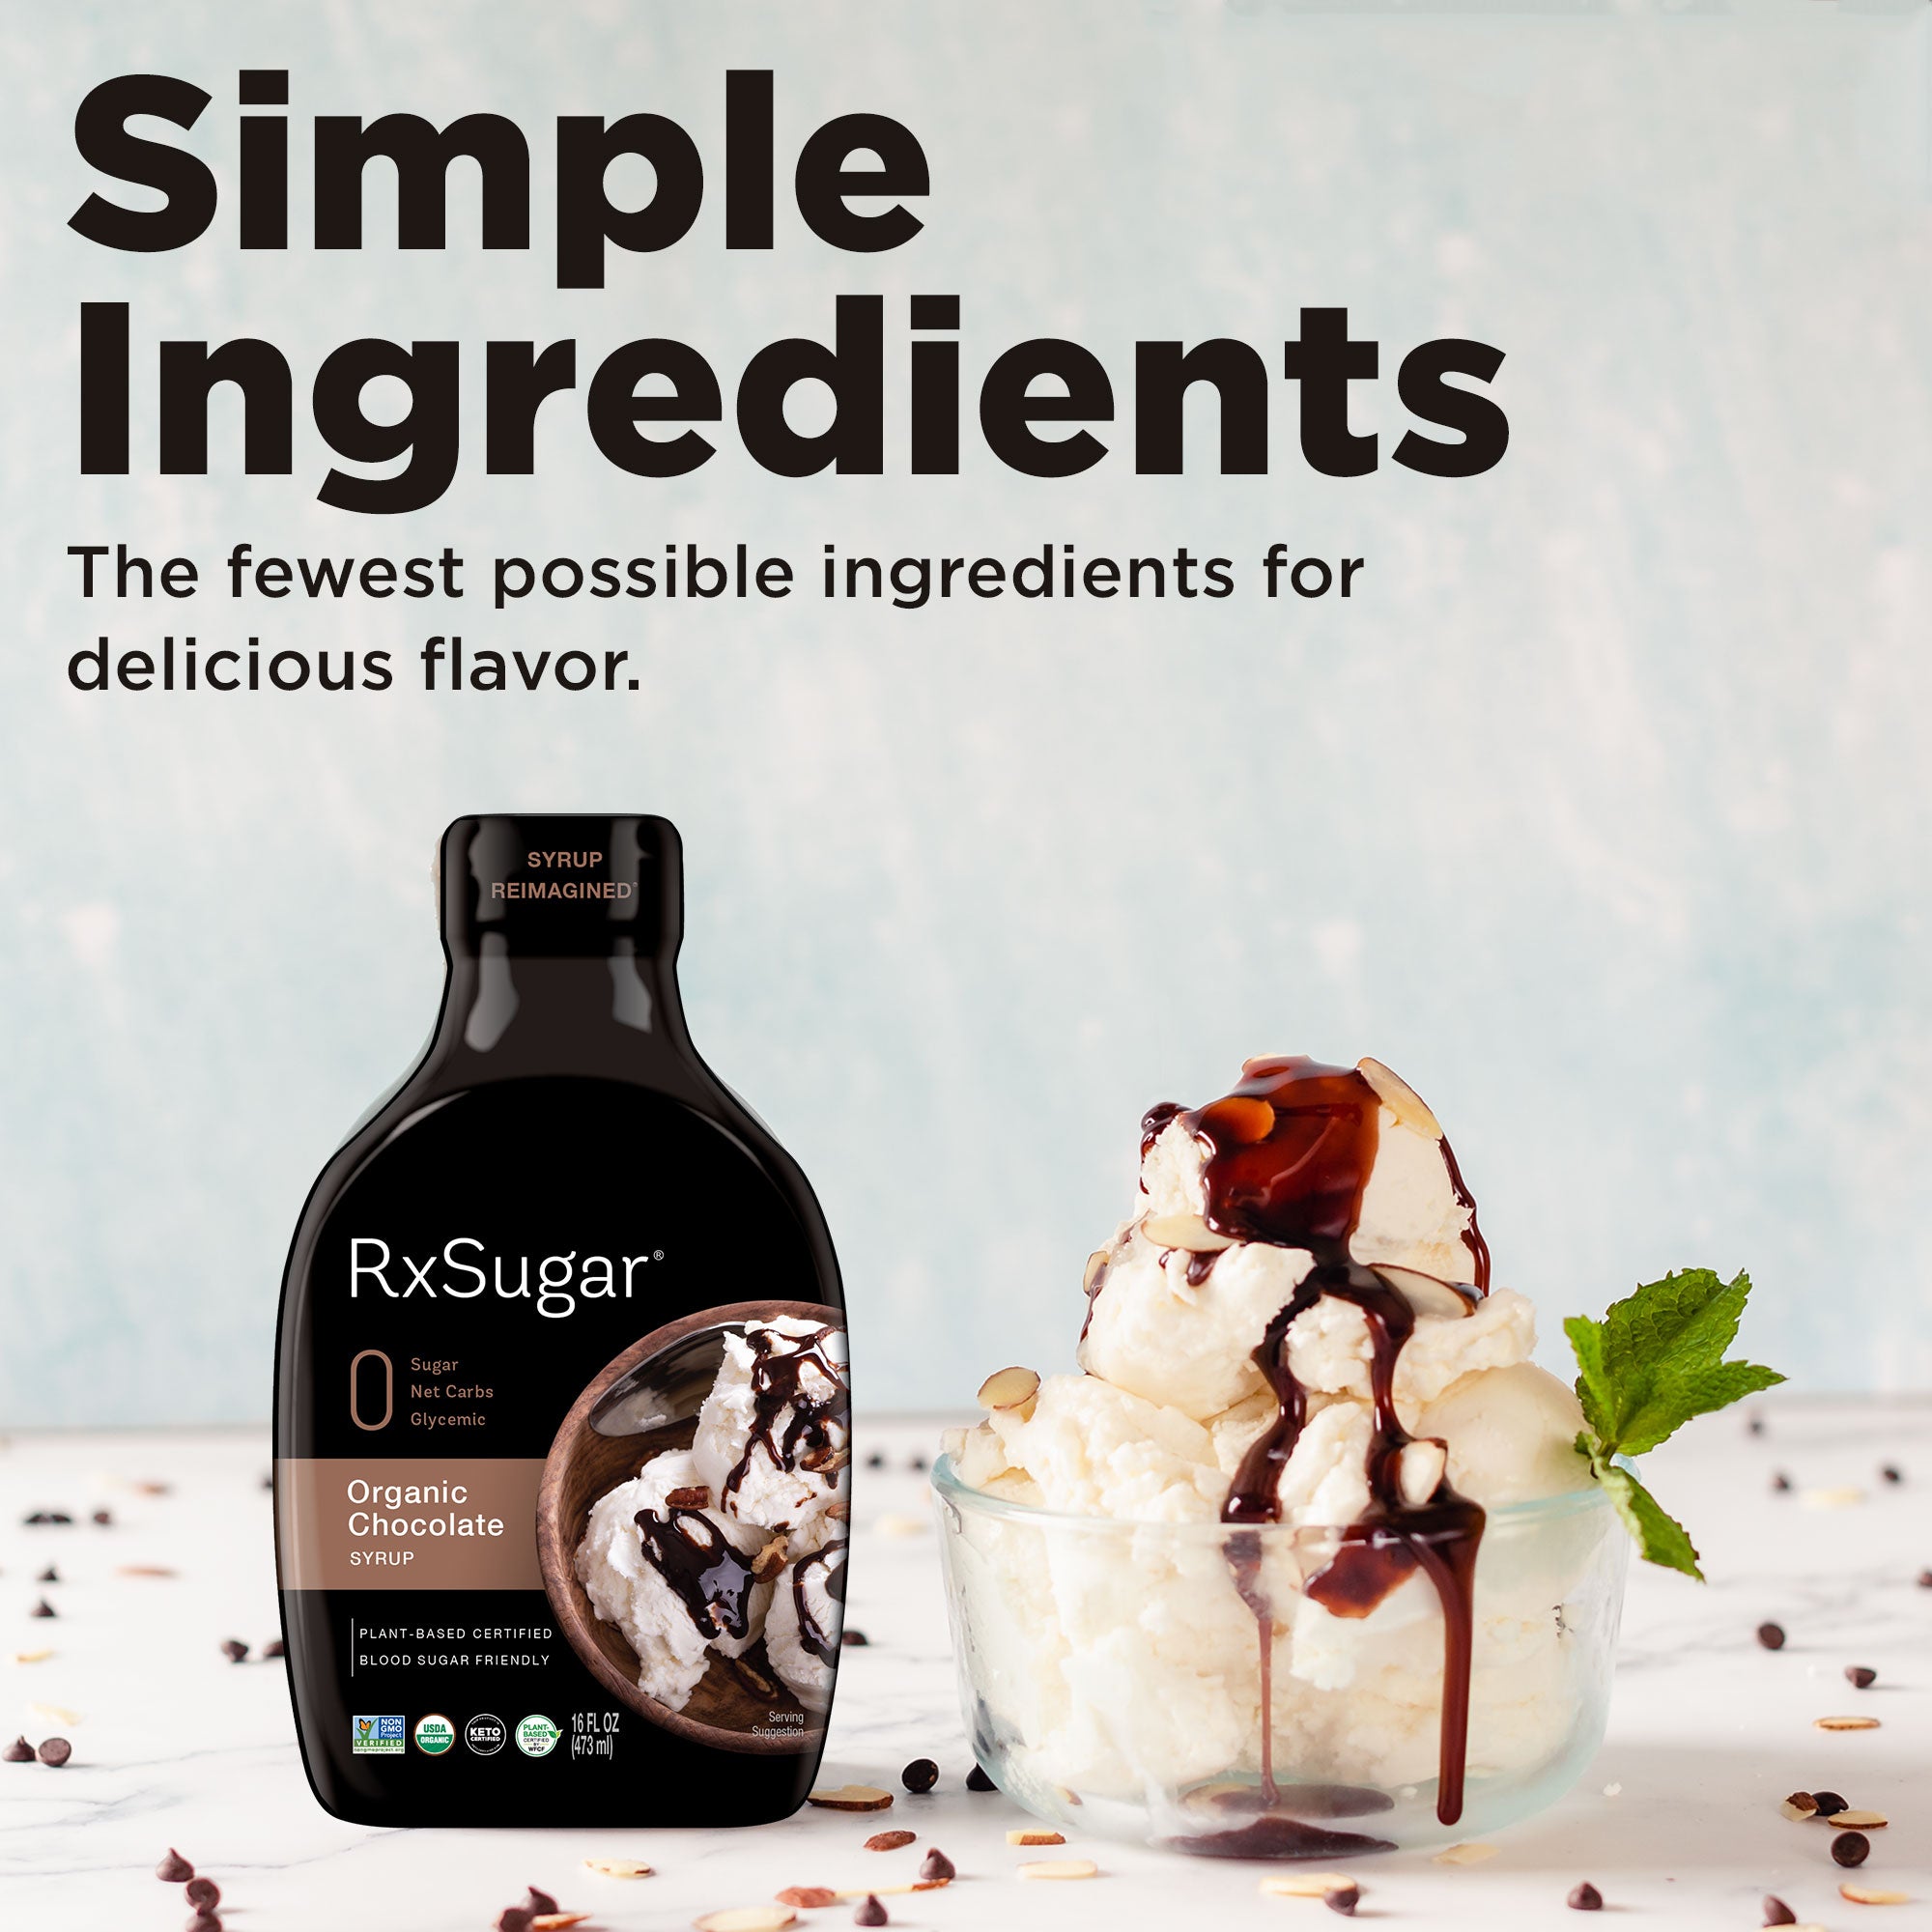 Real Ingredients: the fewest possible ingredients for delicious and unadulterated flavor. No additives. No preservatives. Absolutely no junk. Ice cream with RxSugar chocolate syrup on top.